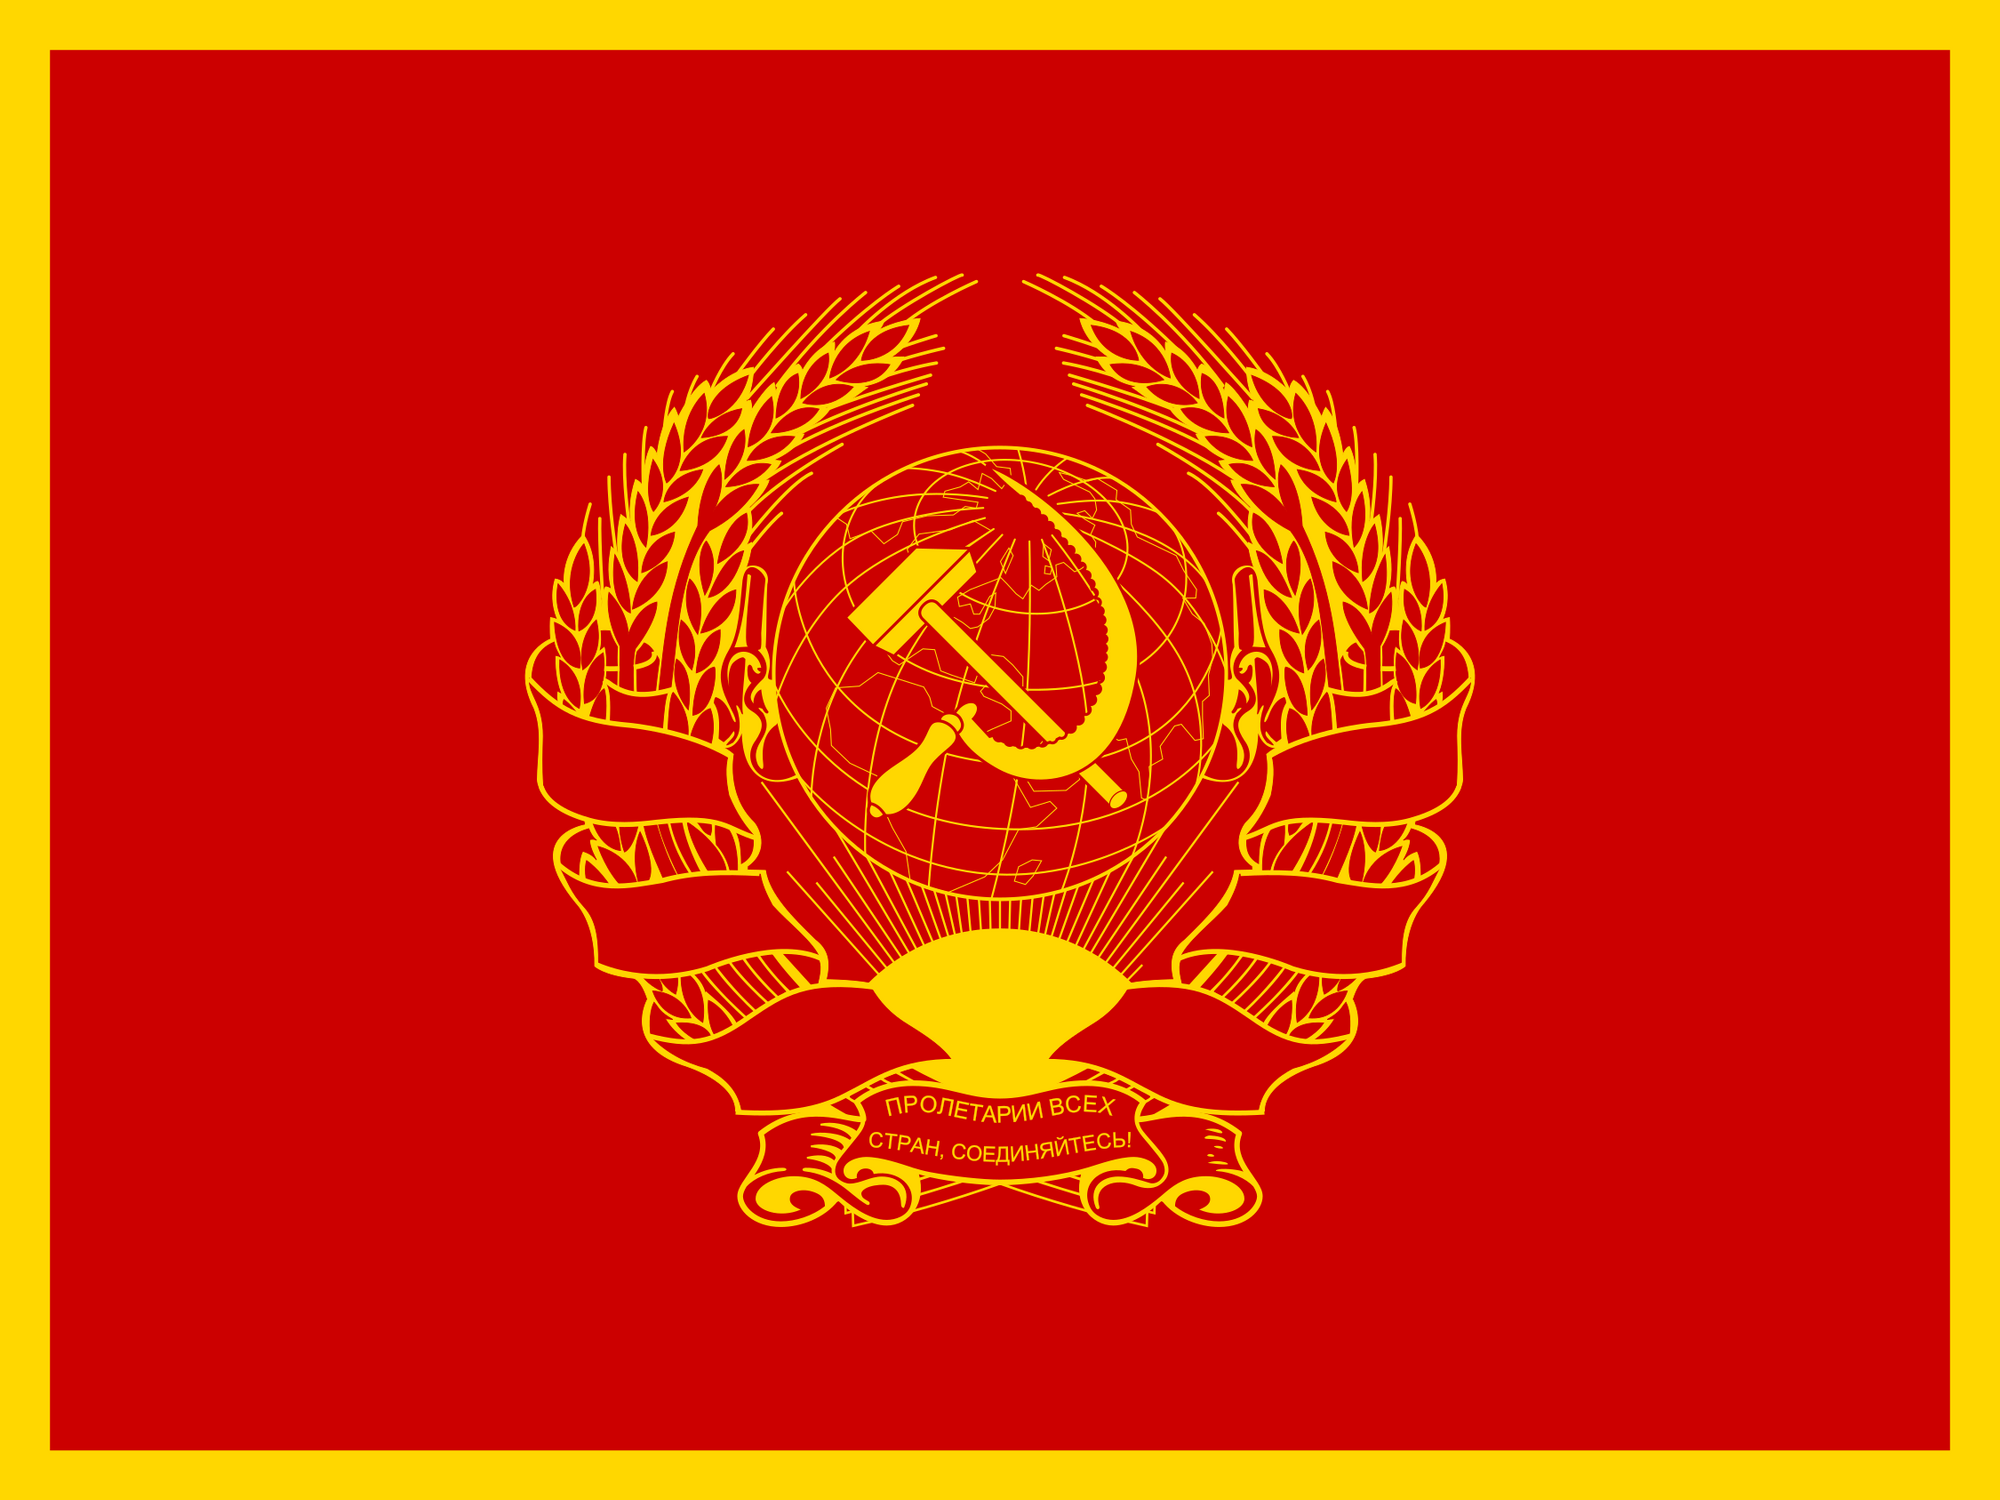 Standard_for_the_President_of_the_Soviet_Union_%28New_Union%29.png